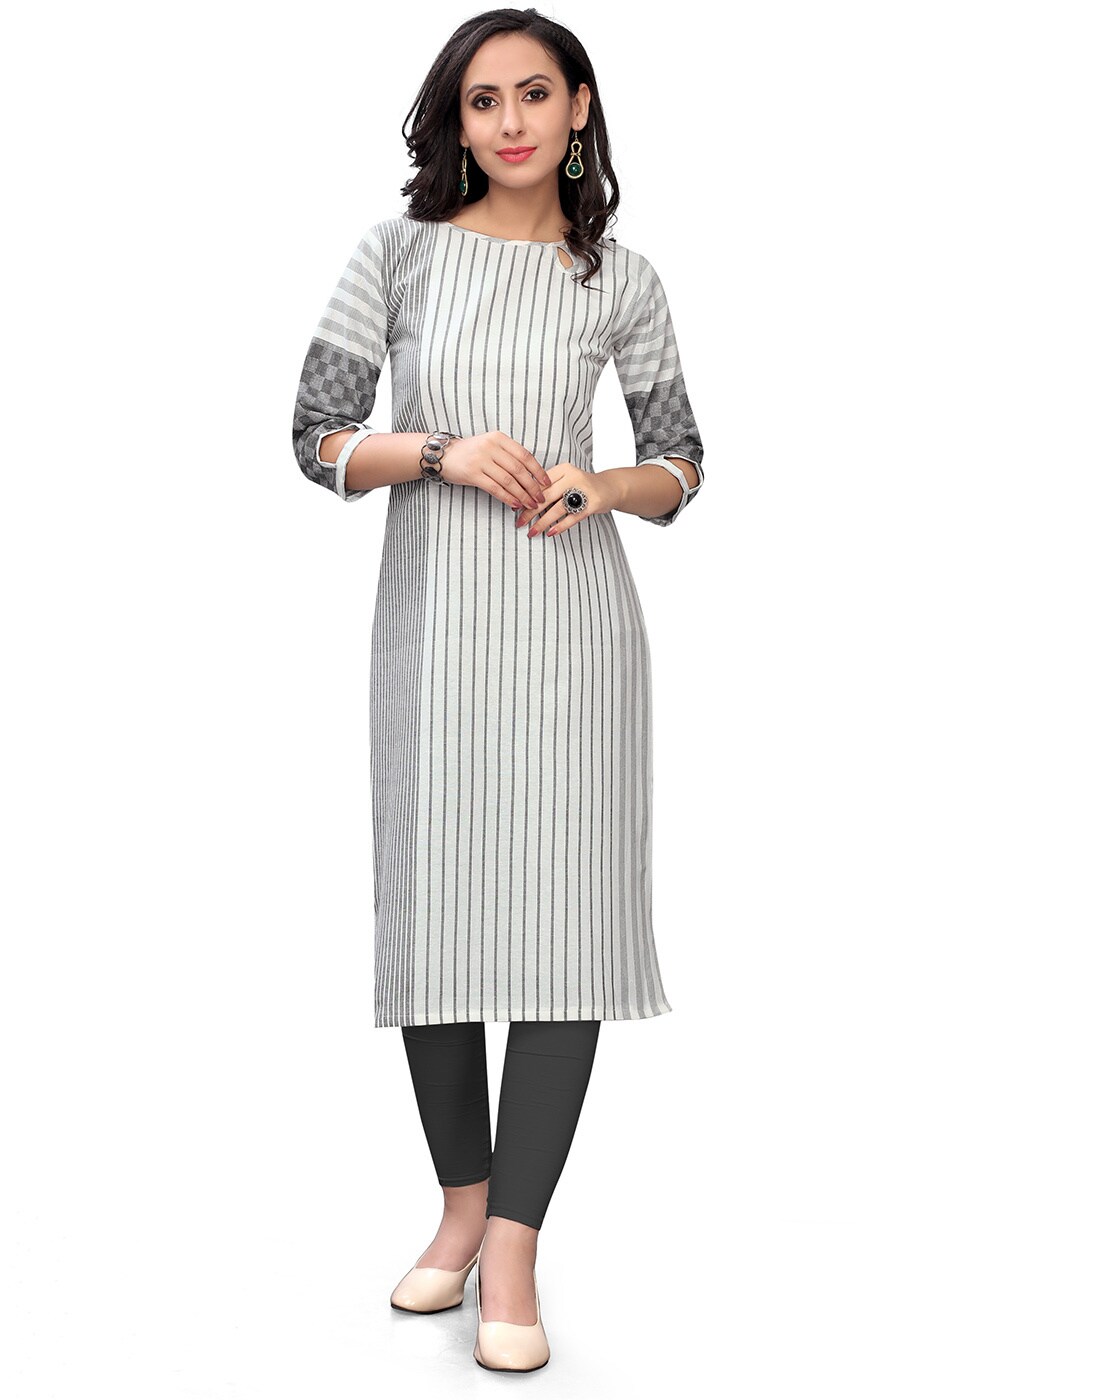 Grey Color Womens Kurtis: Buy Grey Color Womens Kurtis Online at Low Prices  on Snapdeal.com